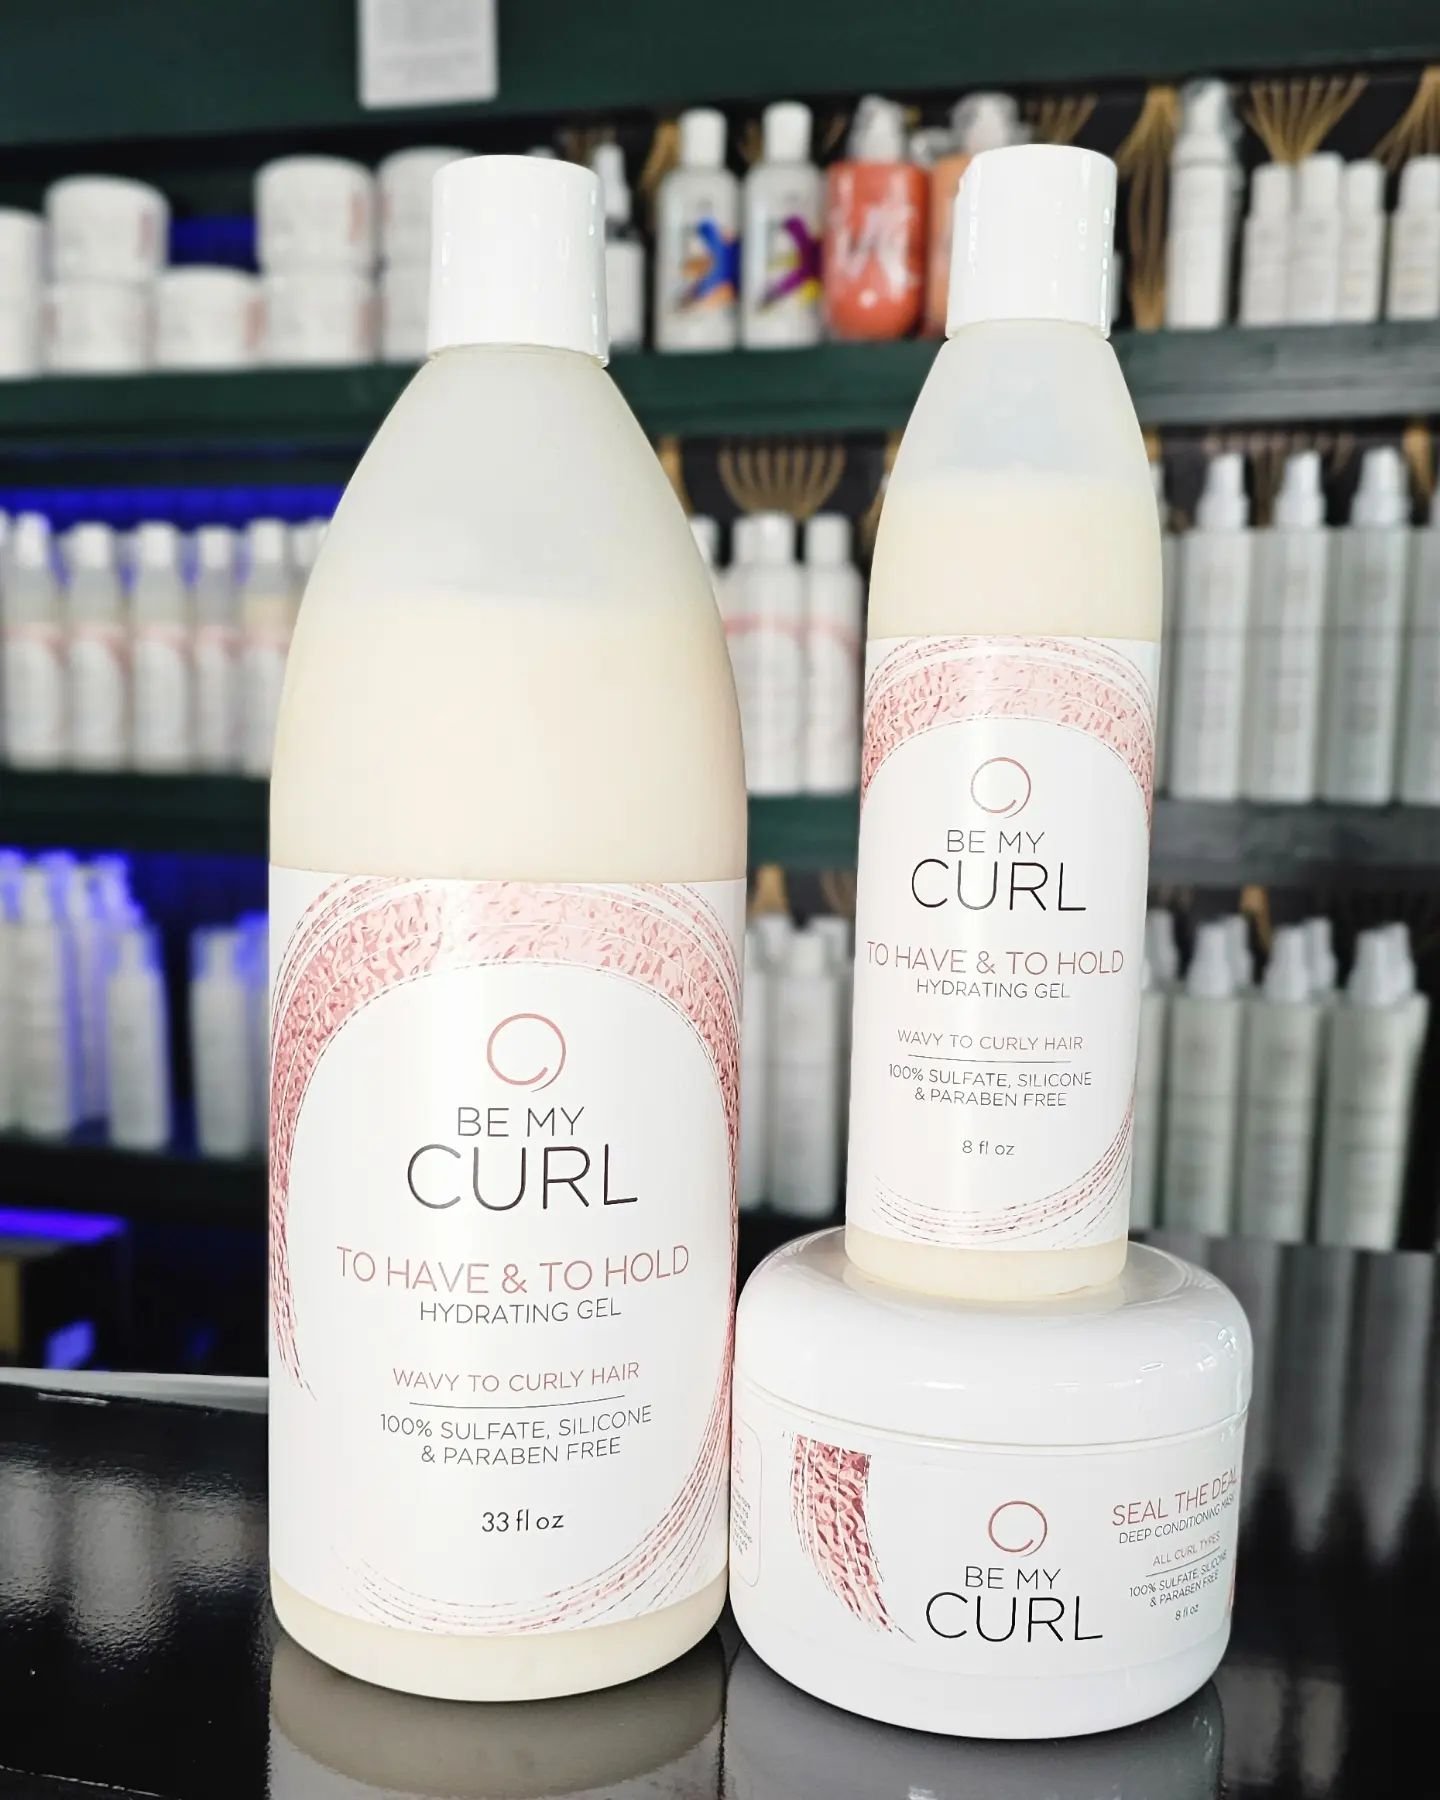 What products are best for taking care of your beautiful curls?

Firstly, when choosing products for curly hair care, you need to consider their texture. Curly hair is usually dry and porous, so it needs moisturizing and nourishment. Avoid products c